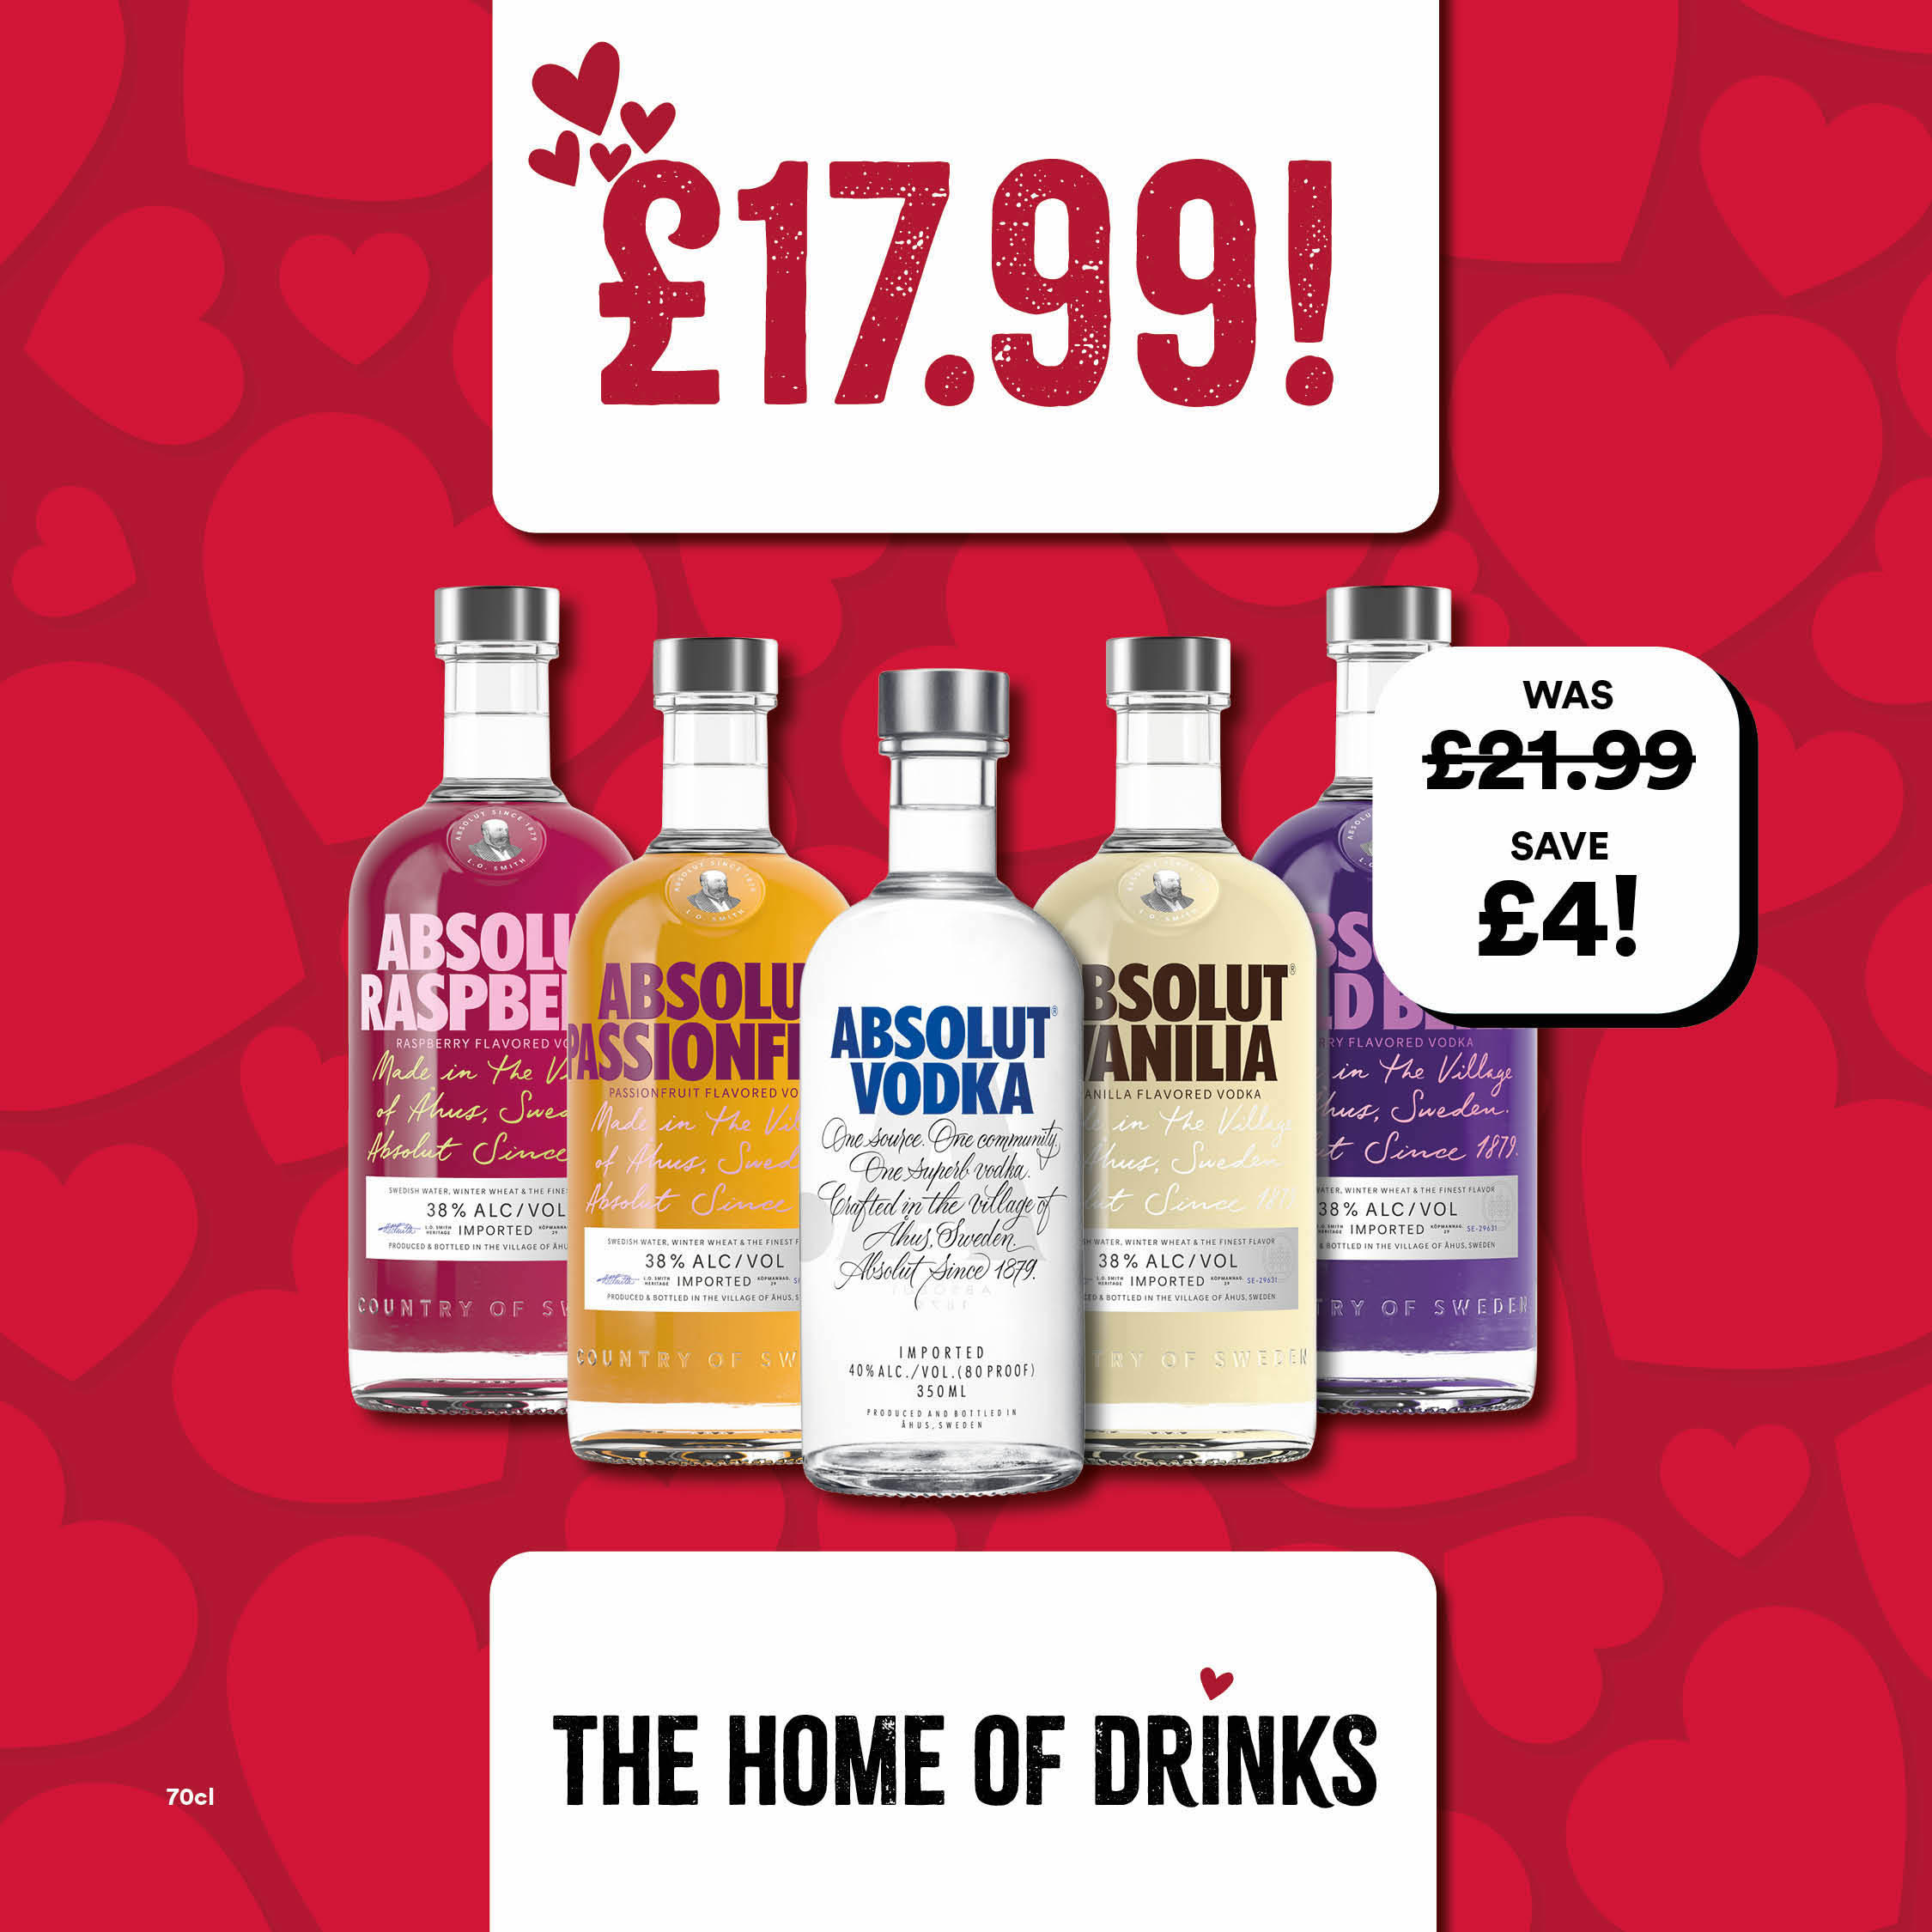 Only £17.99 on Absolut Vodka